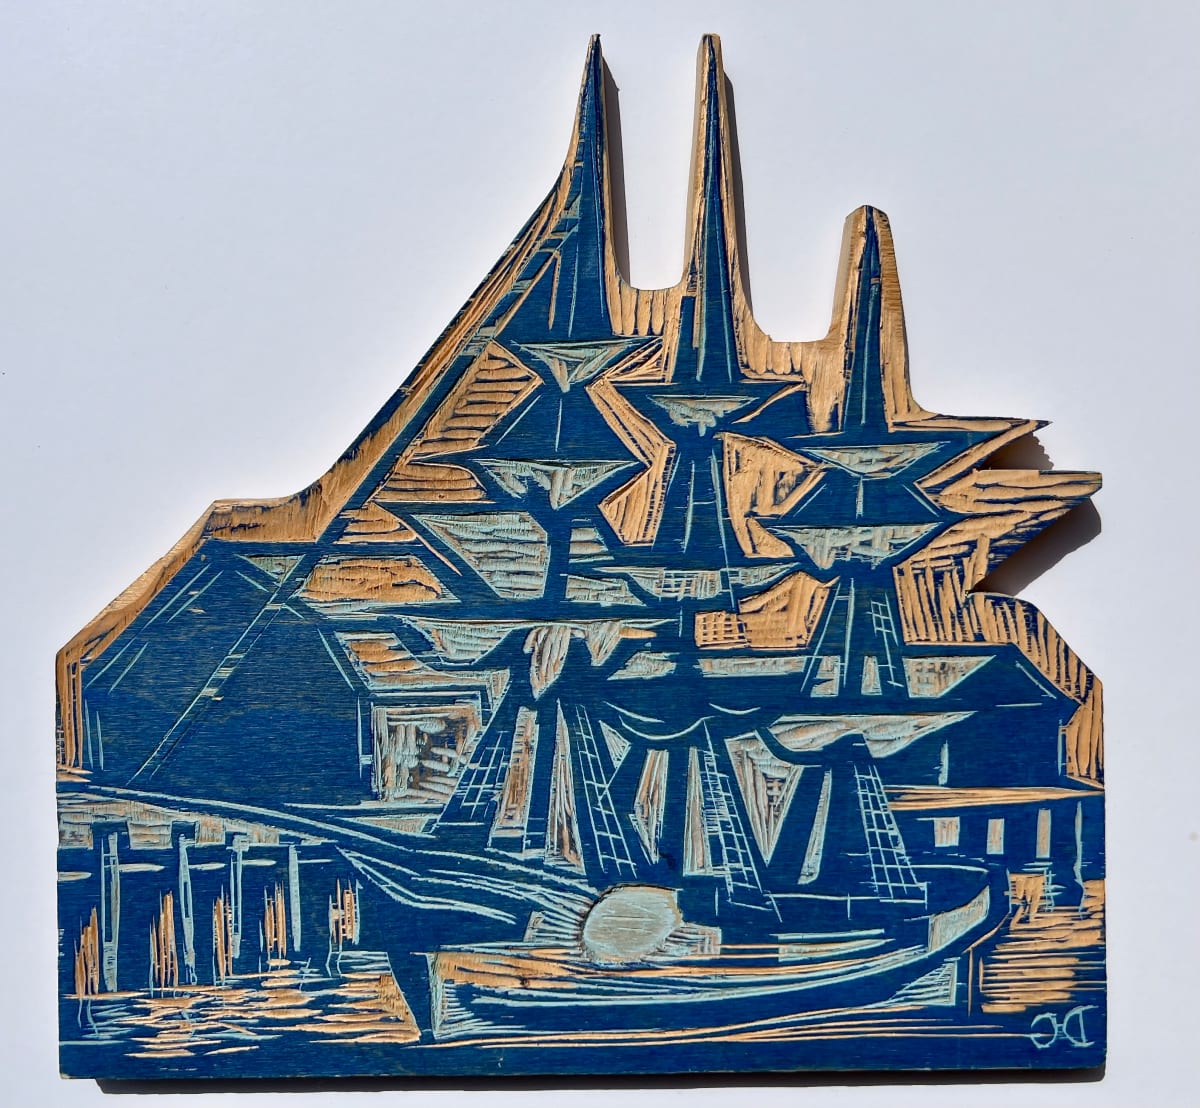 Demonstration Print, Berwick Academy 2014, Woodblock by Don Gorvett  Image: A puzzle piece shaped woodblock with the original pigment from a school printing demonstration in 2014.